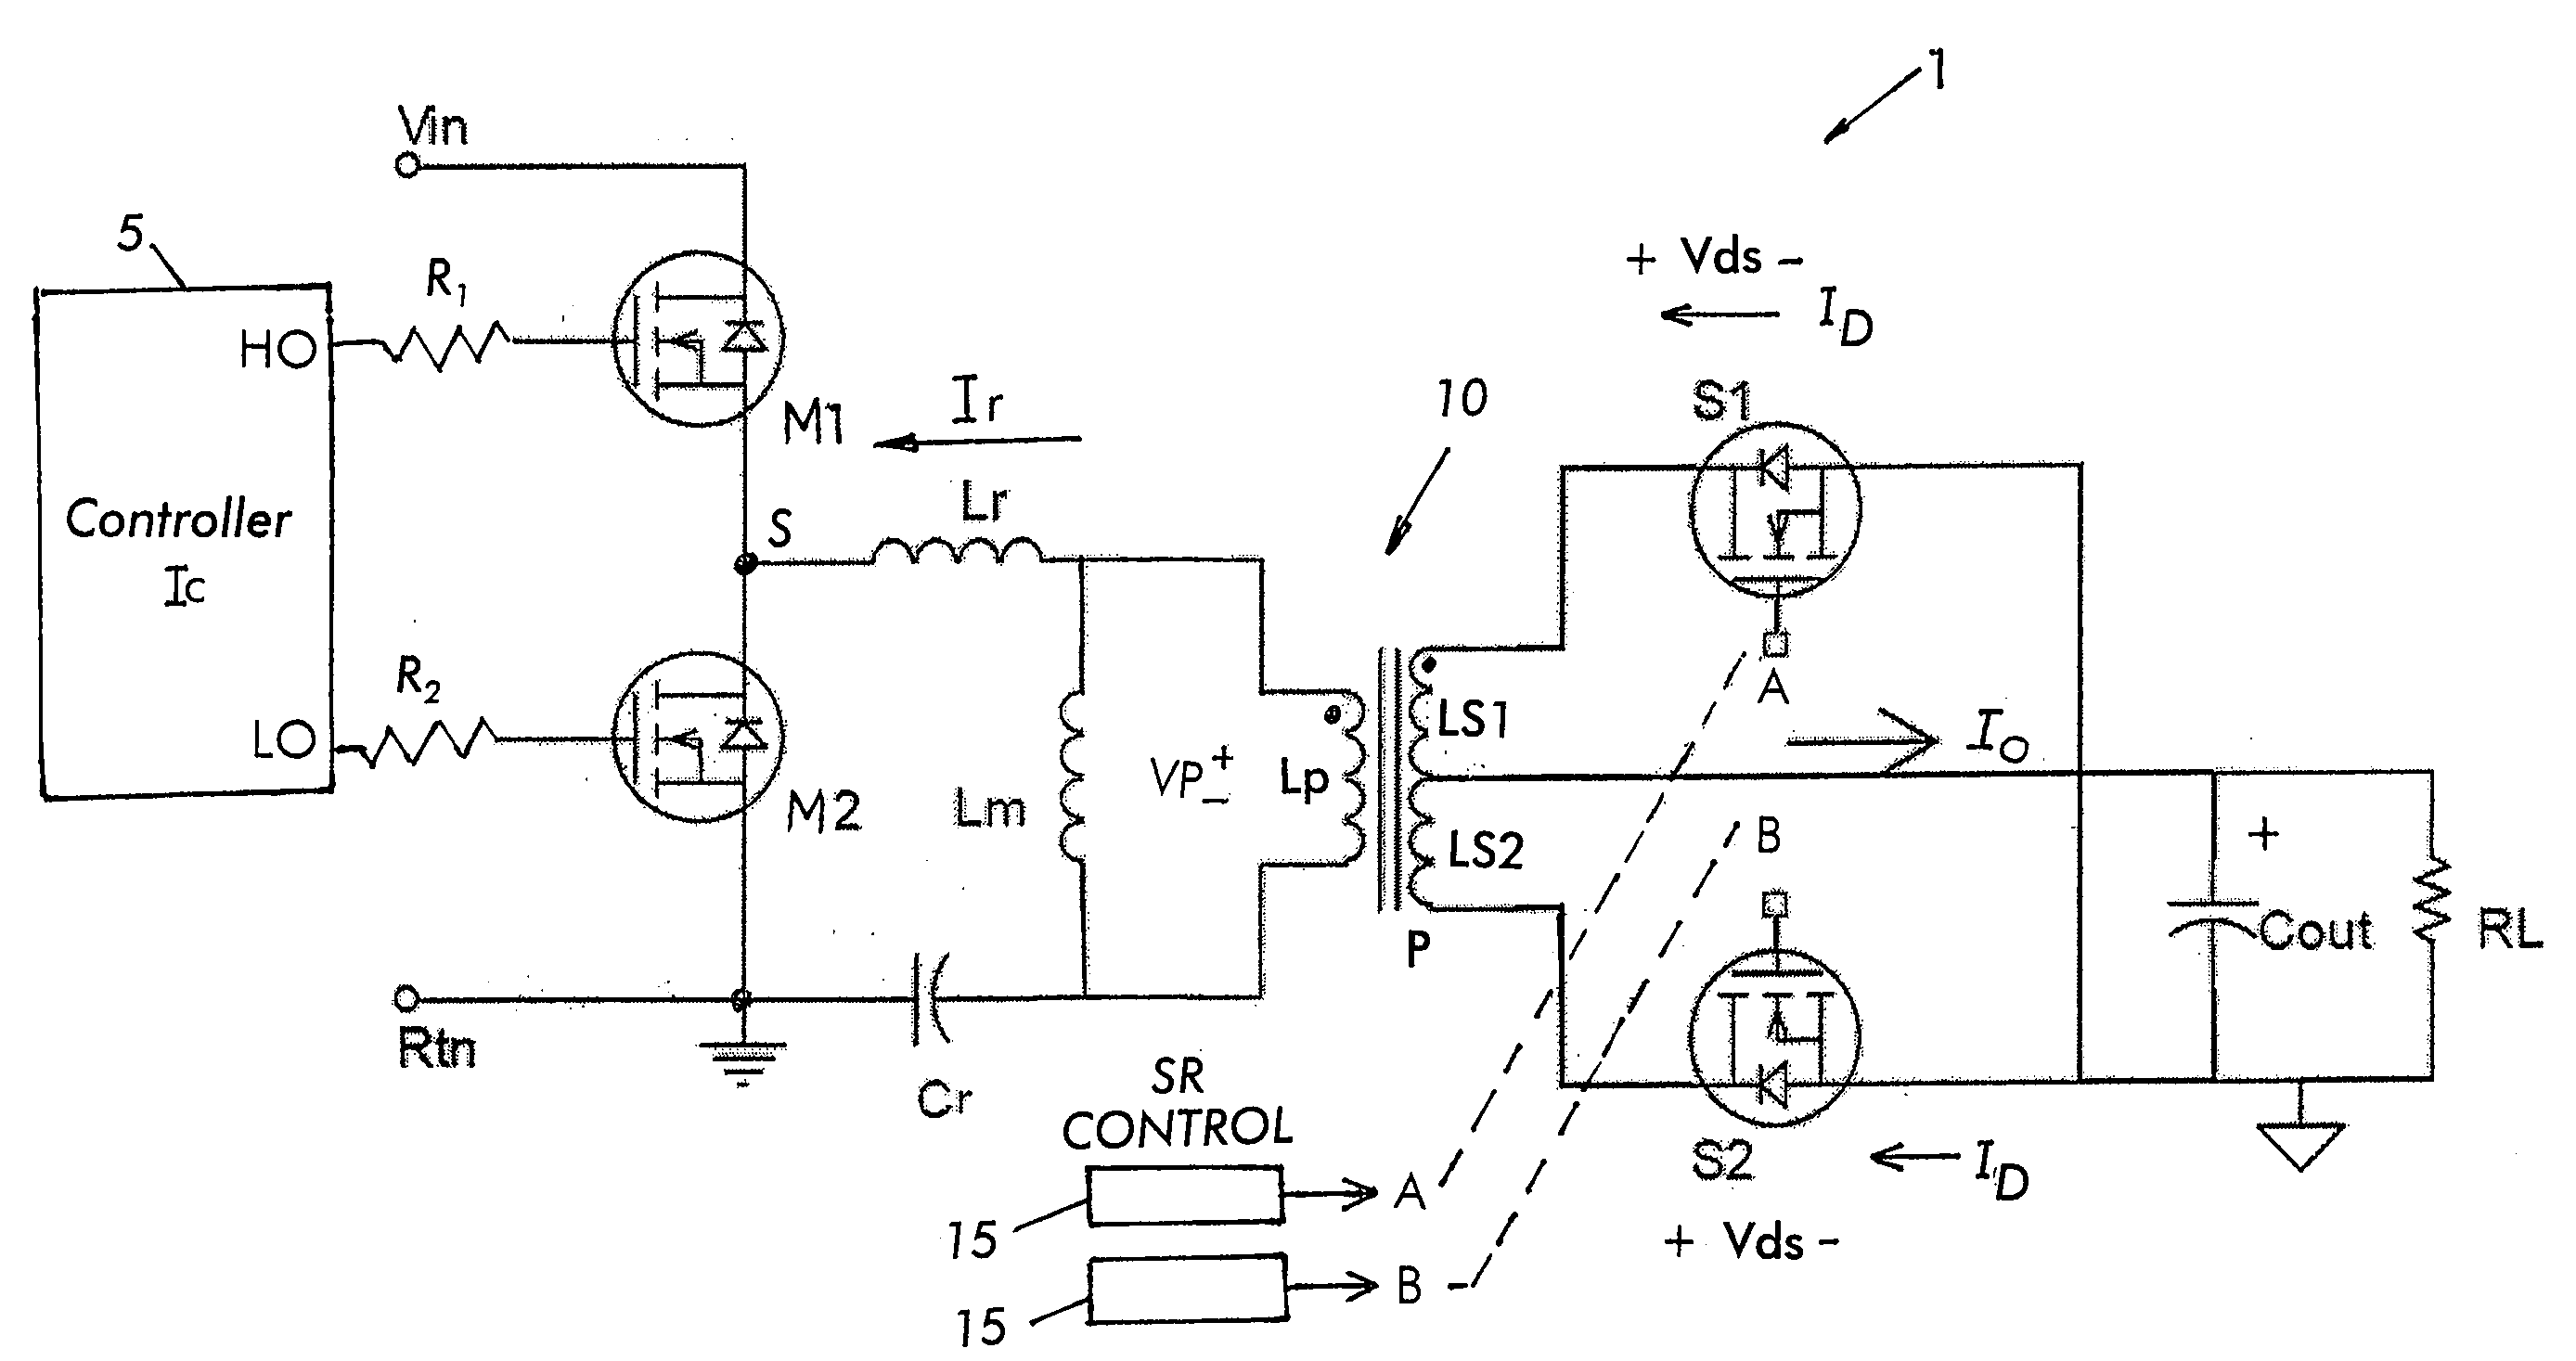 Secondary side synchronous rectifier for resonant converter